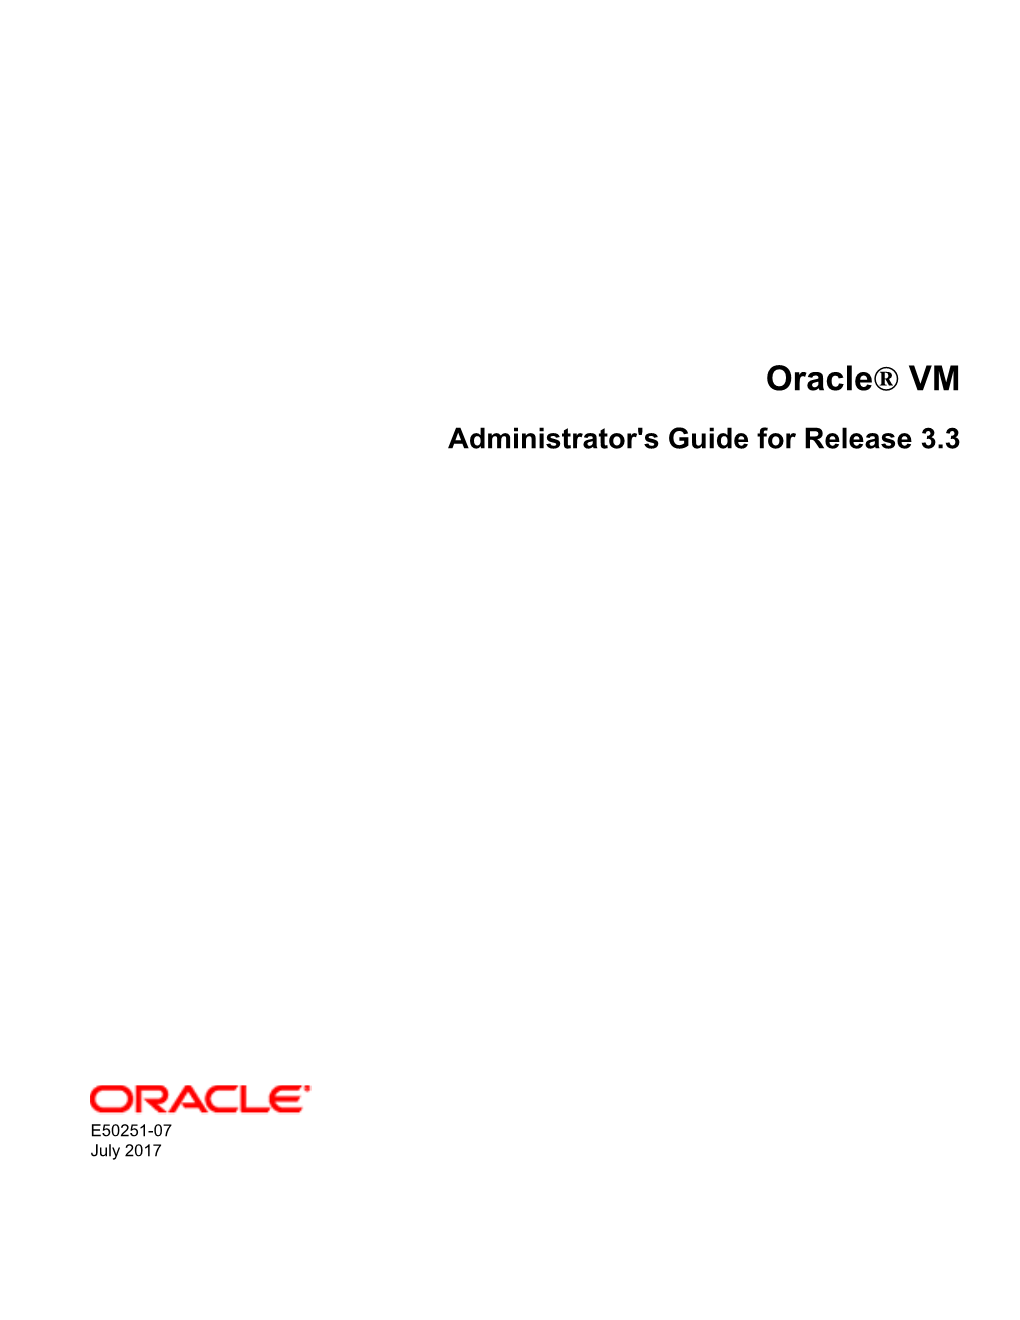 Oracle® VM Administrator's Guide for Release 3.3